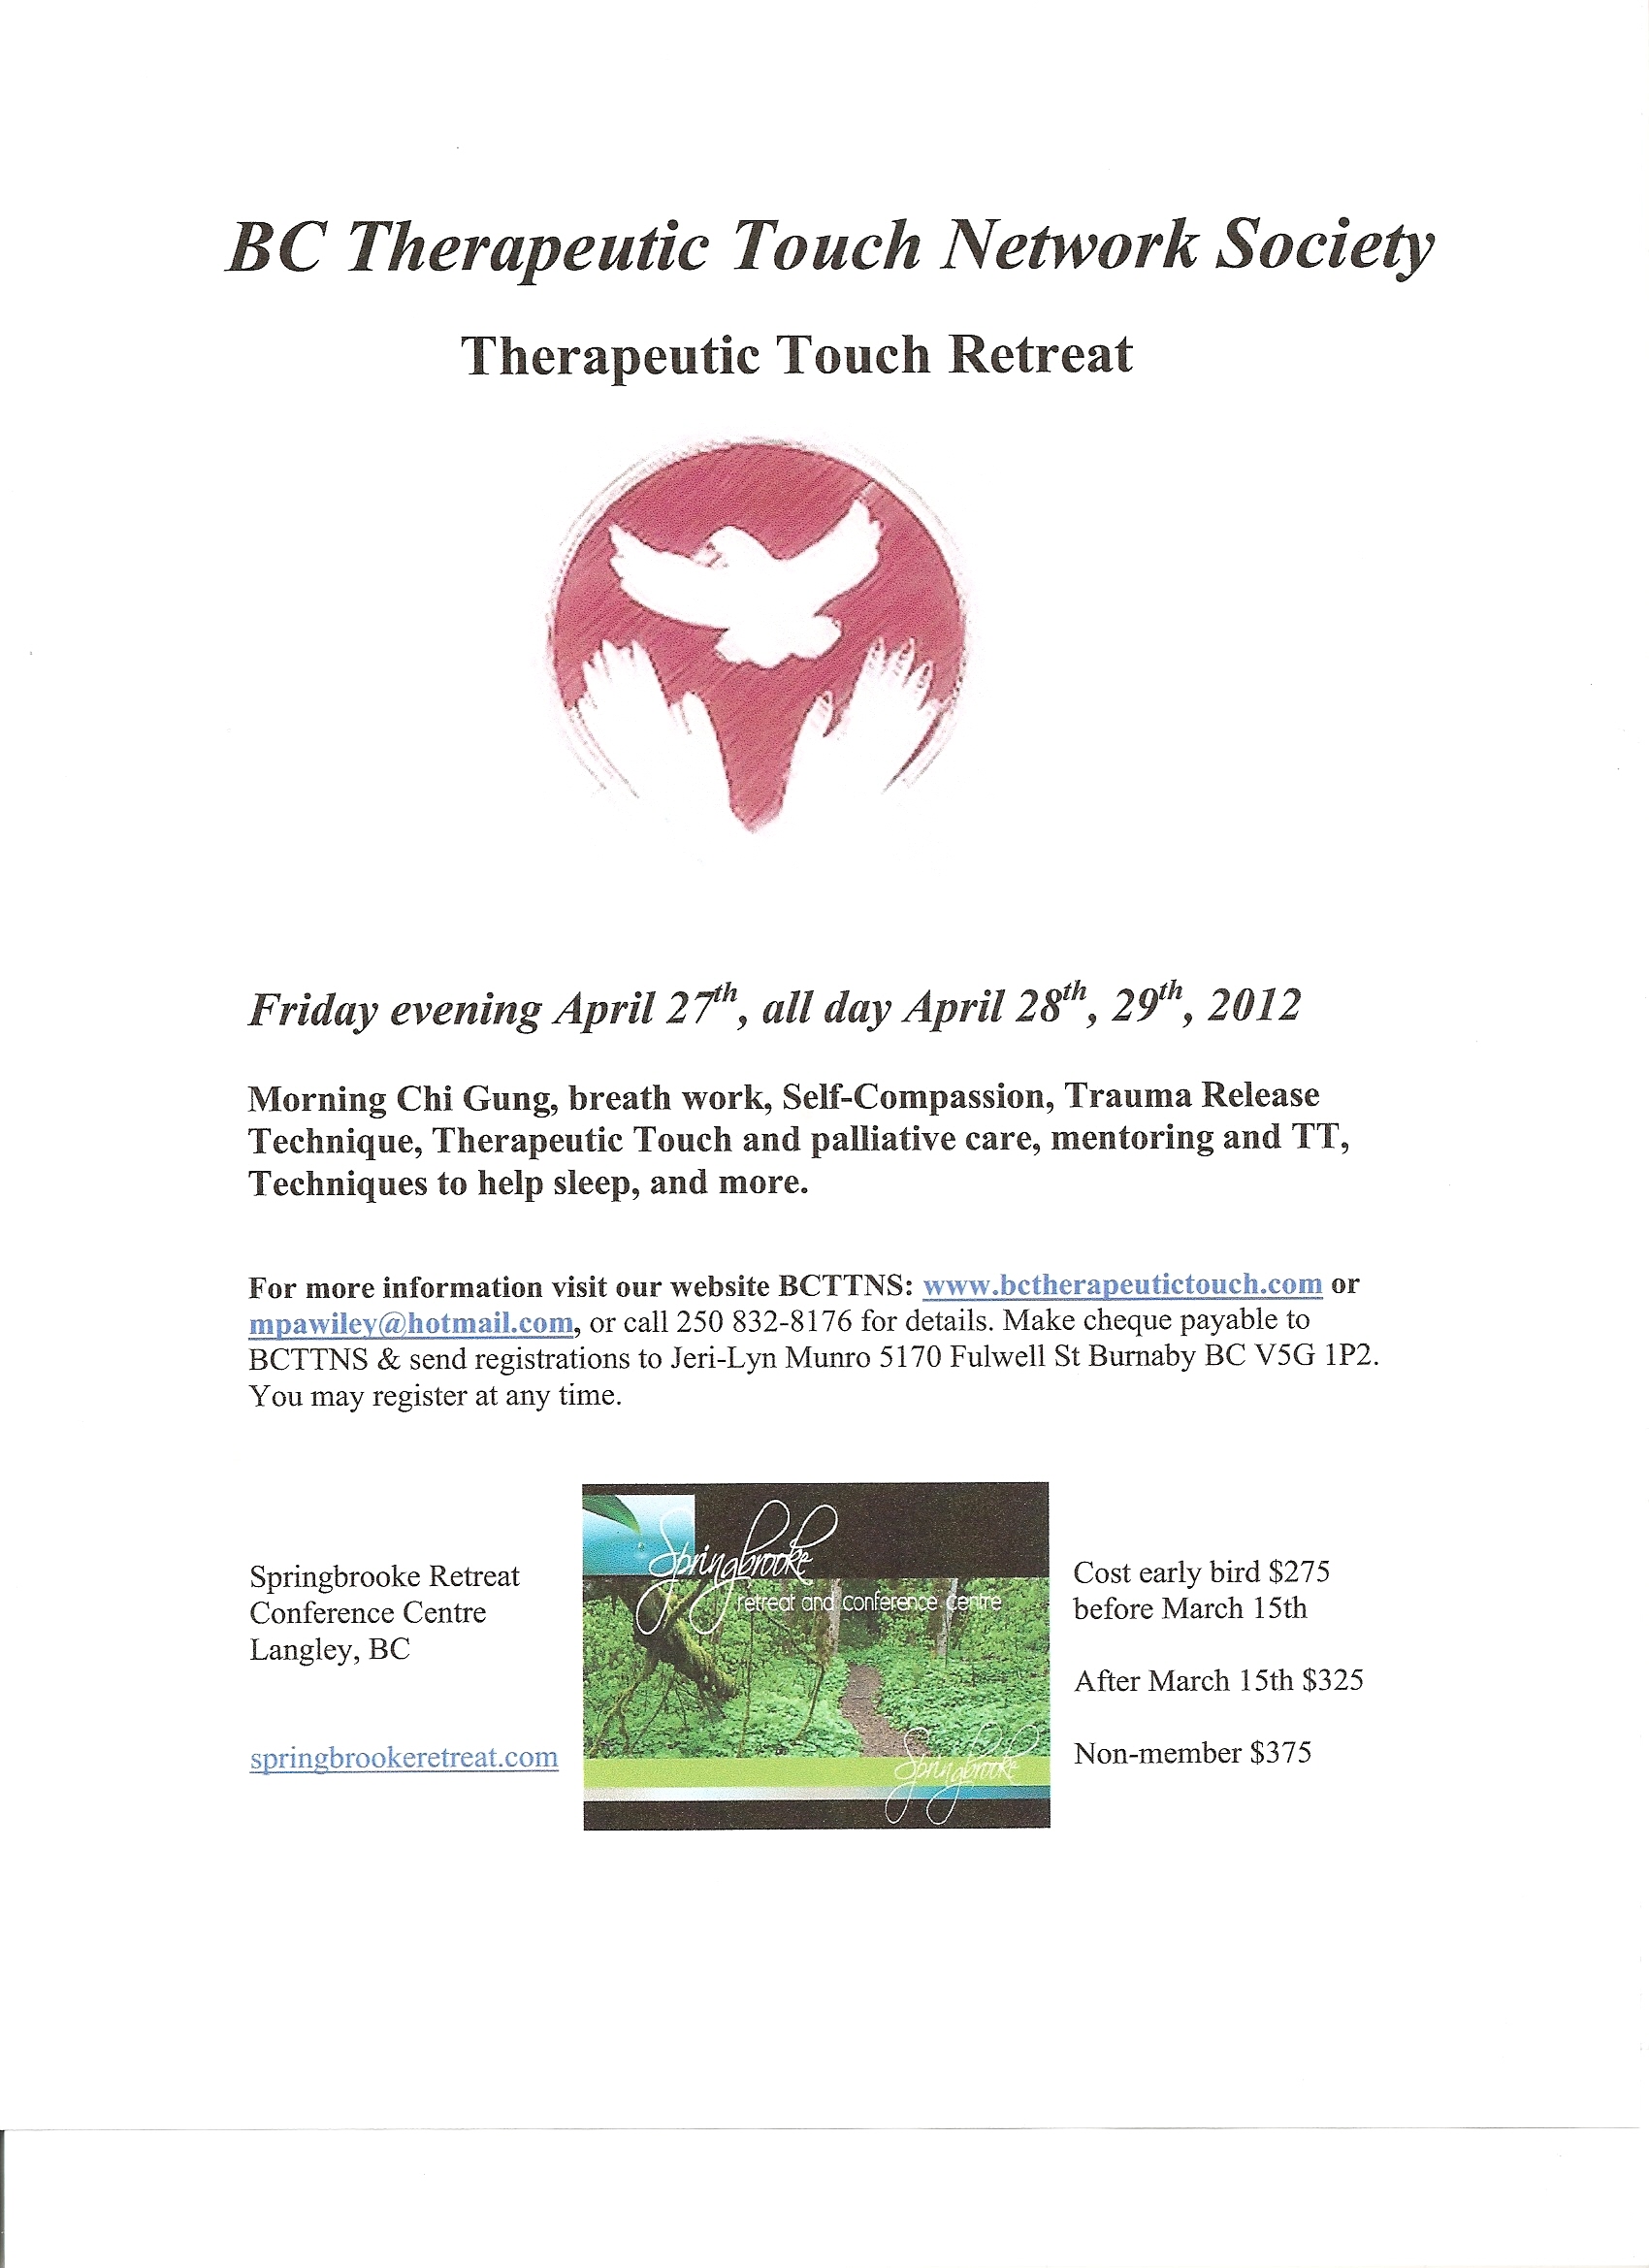 Poster on upcoming BC Therapeutic Touch Network Retreat April 27-29, 2012